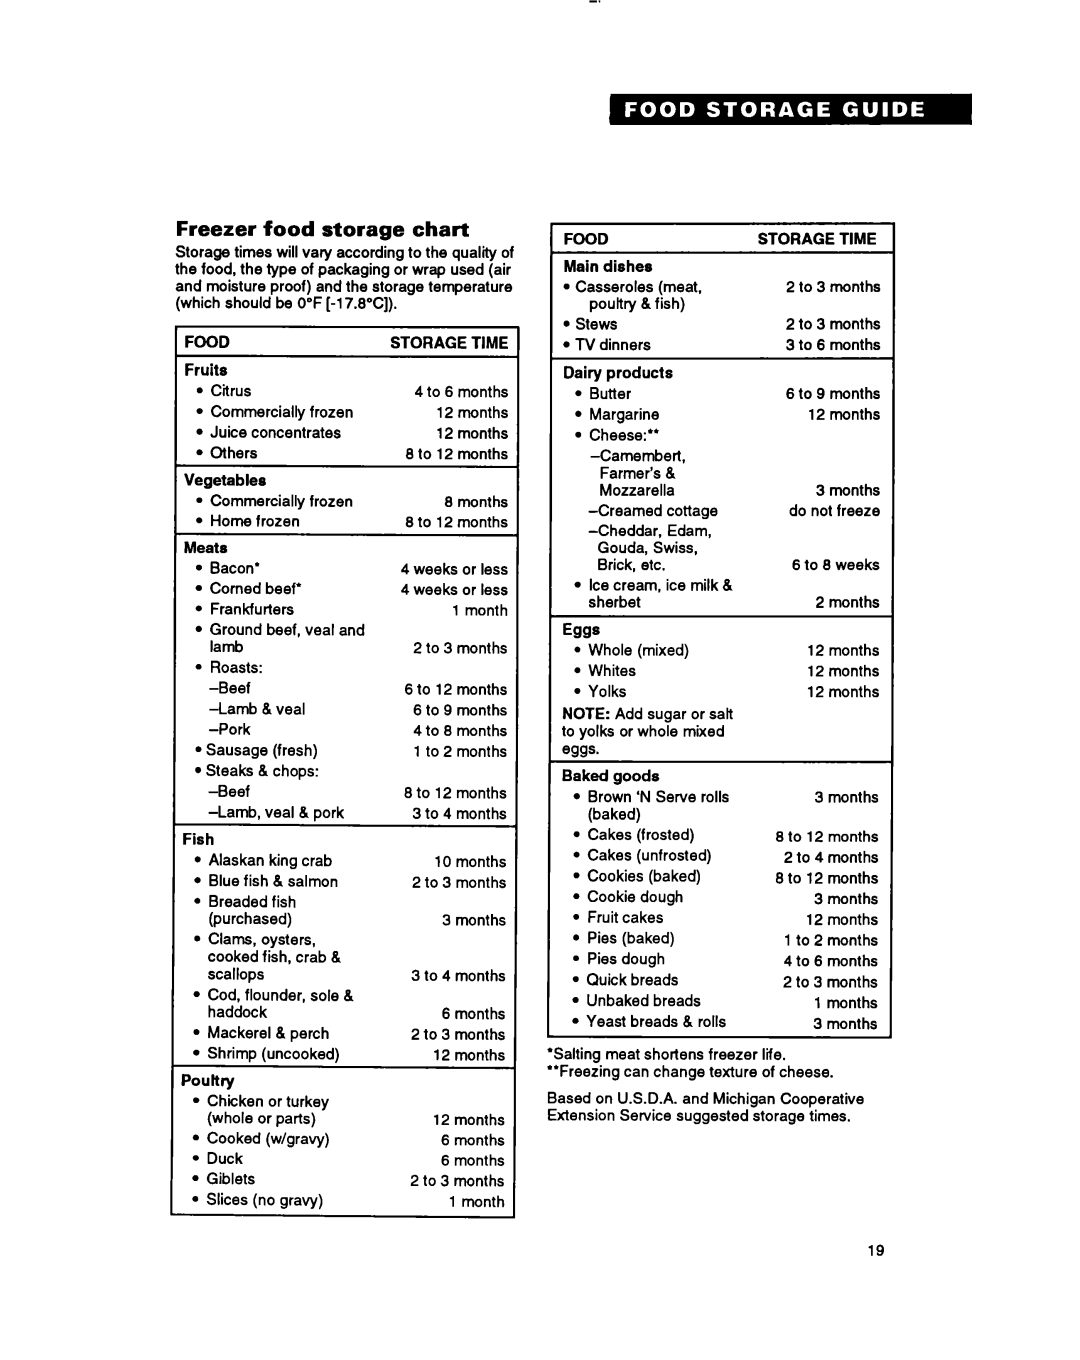 Whirlpool TT18CK Freezer food storage chart, Food, Main dishes, Vegetables, Dairy products, Meats, ‘ish, Baked goods 